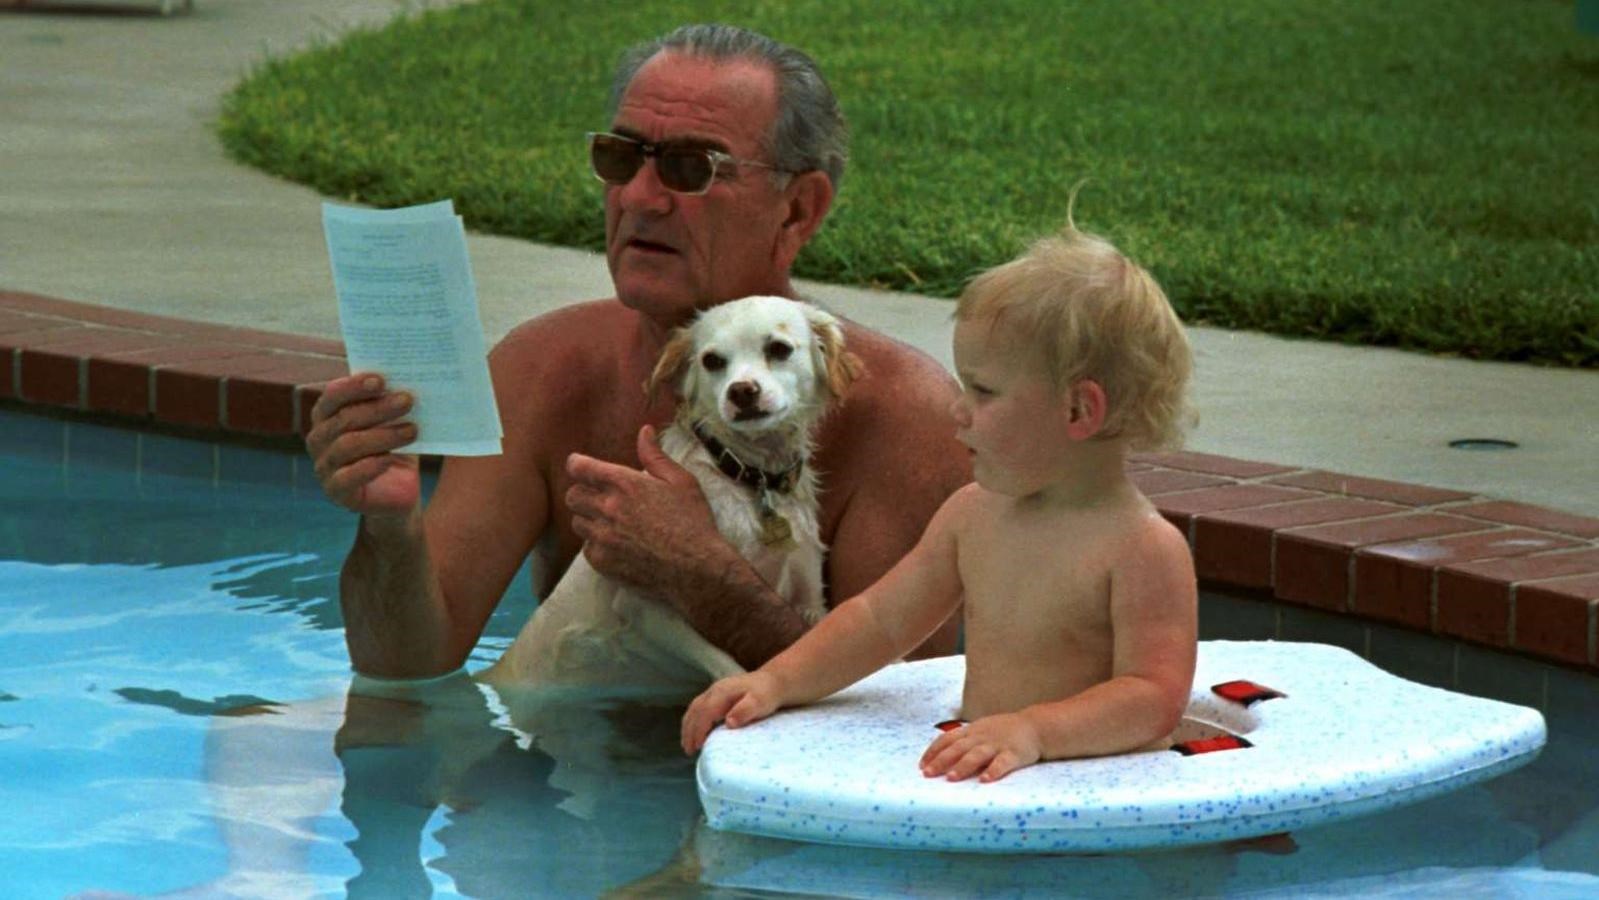 While he reads papers, the president holds a dog in a swimming pool next to his young grandson.